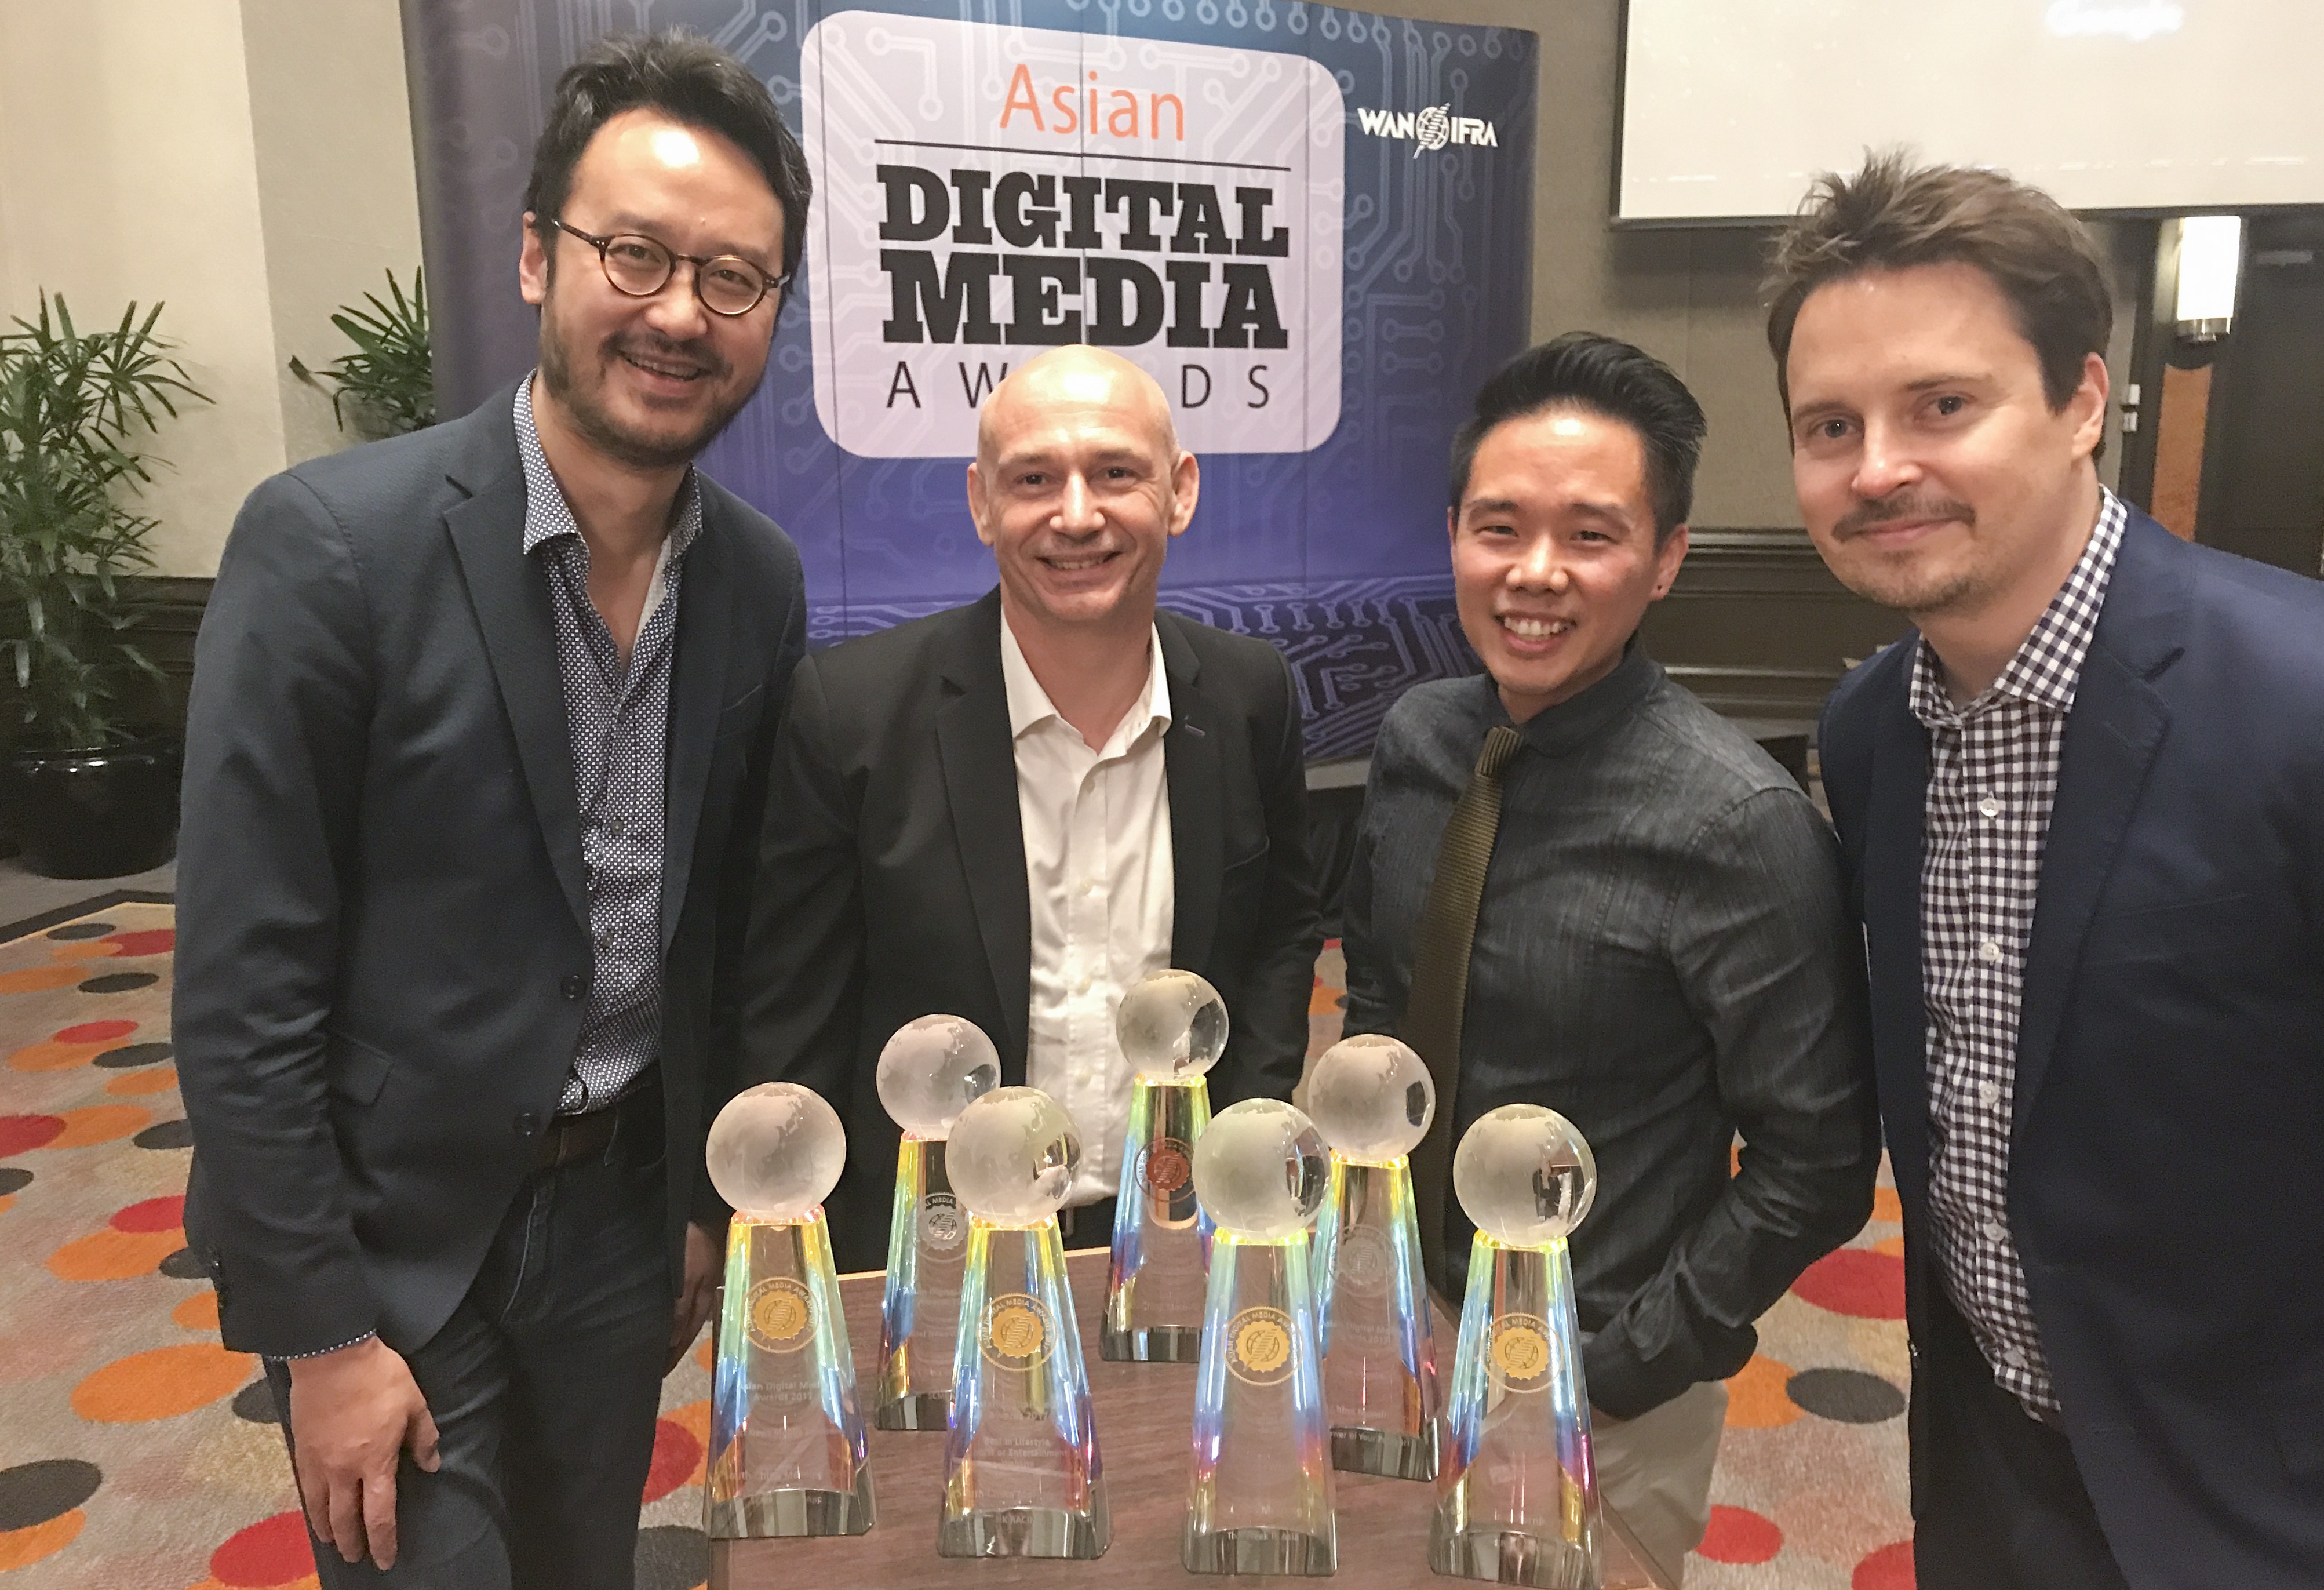 Members of the South China Morning Post's editorial team Chow Chung-yan, Darren Long, Malcolm Ong and Ben Abbotts at the Asian Digital Media Awards 2017. Photo: Benson Chao